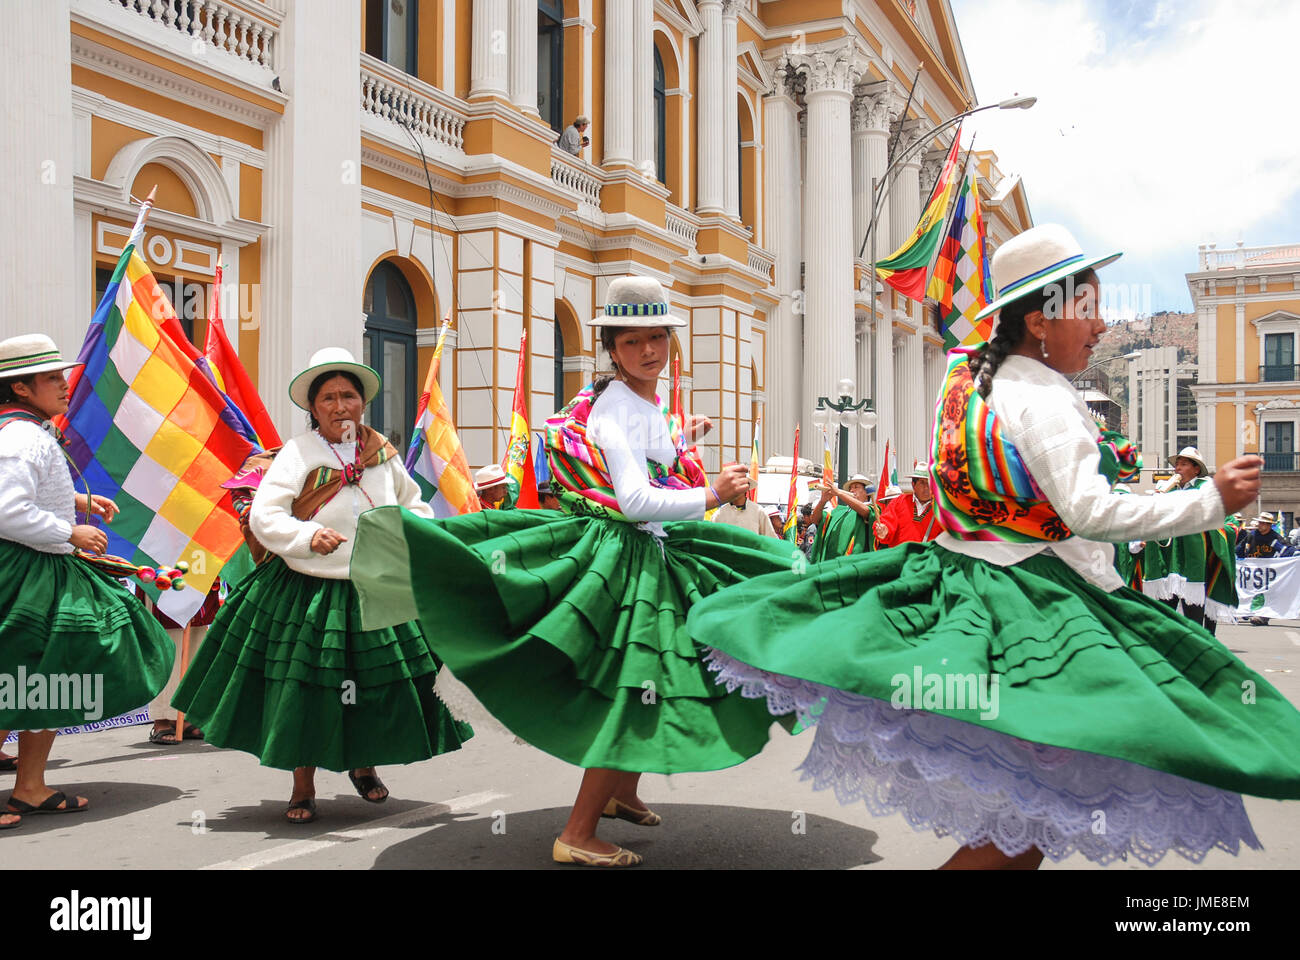 Bolivian People In Colorful Traditional Costumes Celebrating The Stock